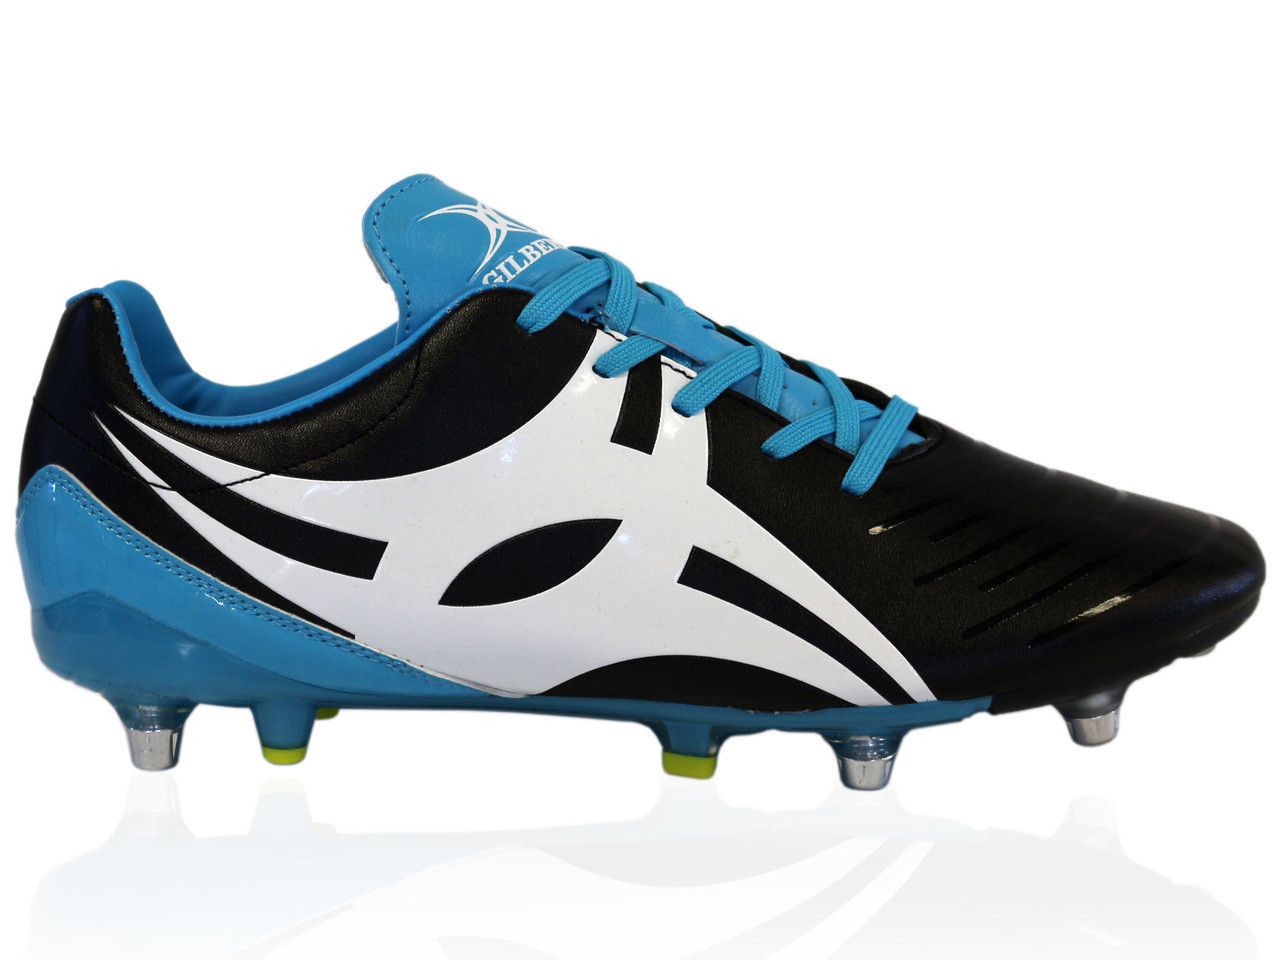 Gilbert Rugby Ignite Touch Boot on sale 